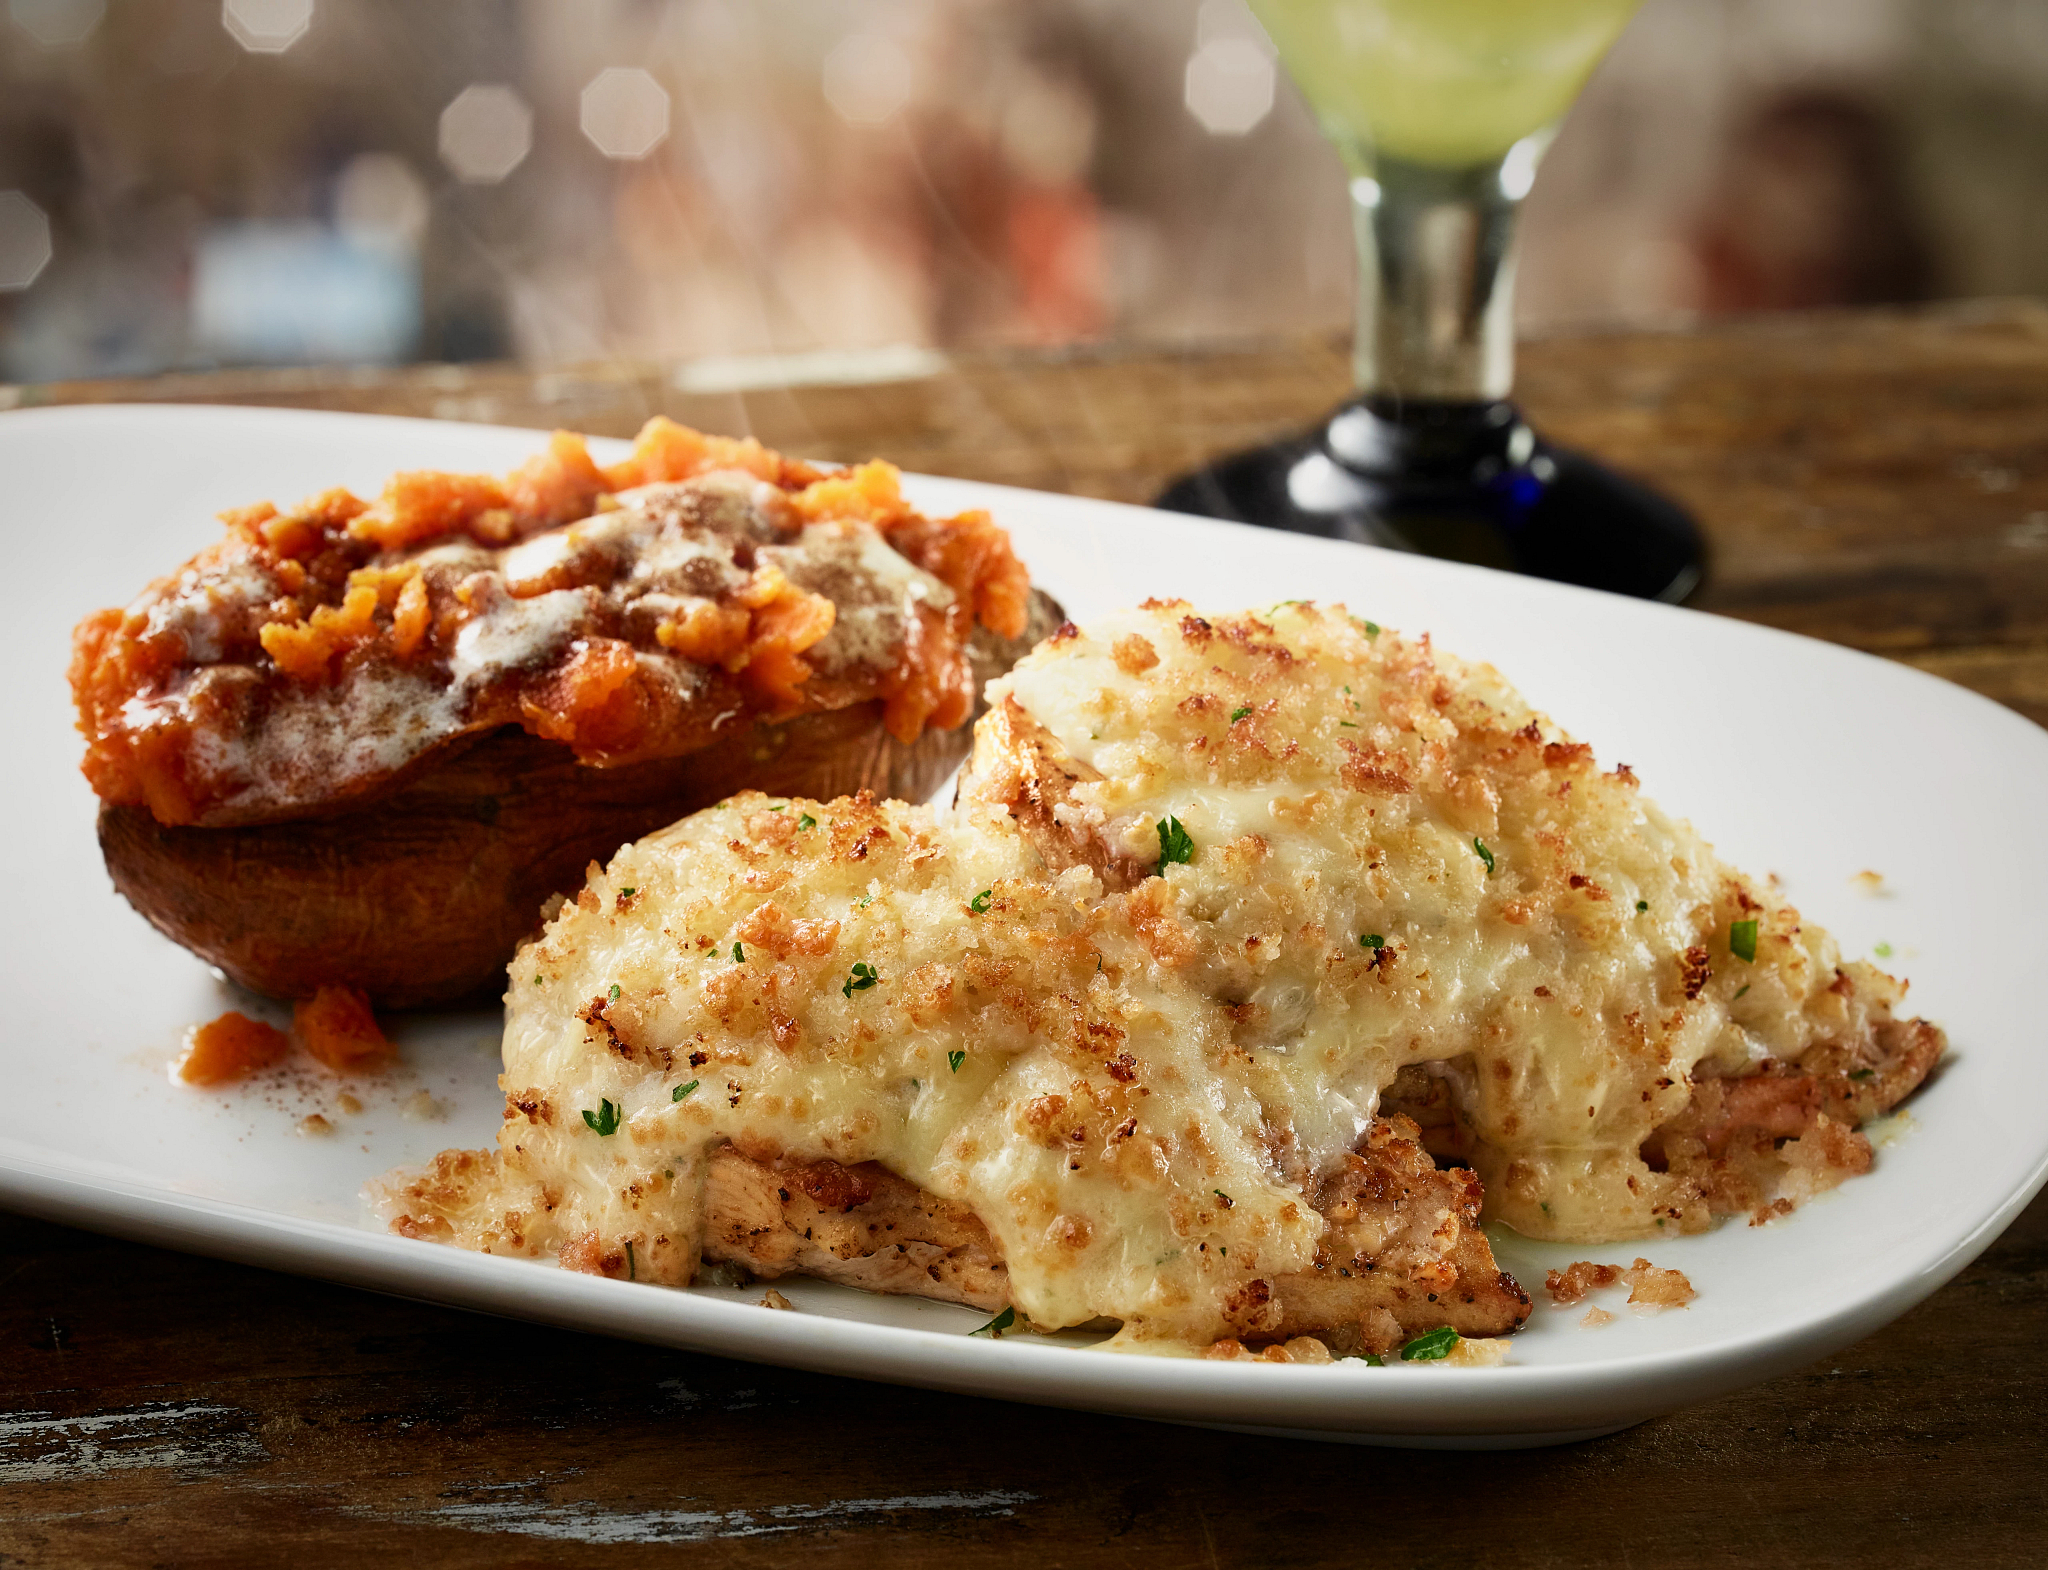 Order our Parmesan Crusted Chicken made with grilled chicken topped with a creamy Parmesan and garlic cheese crust.